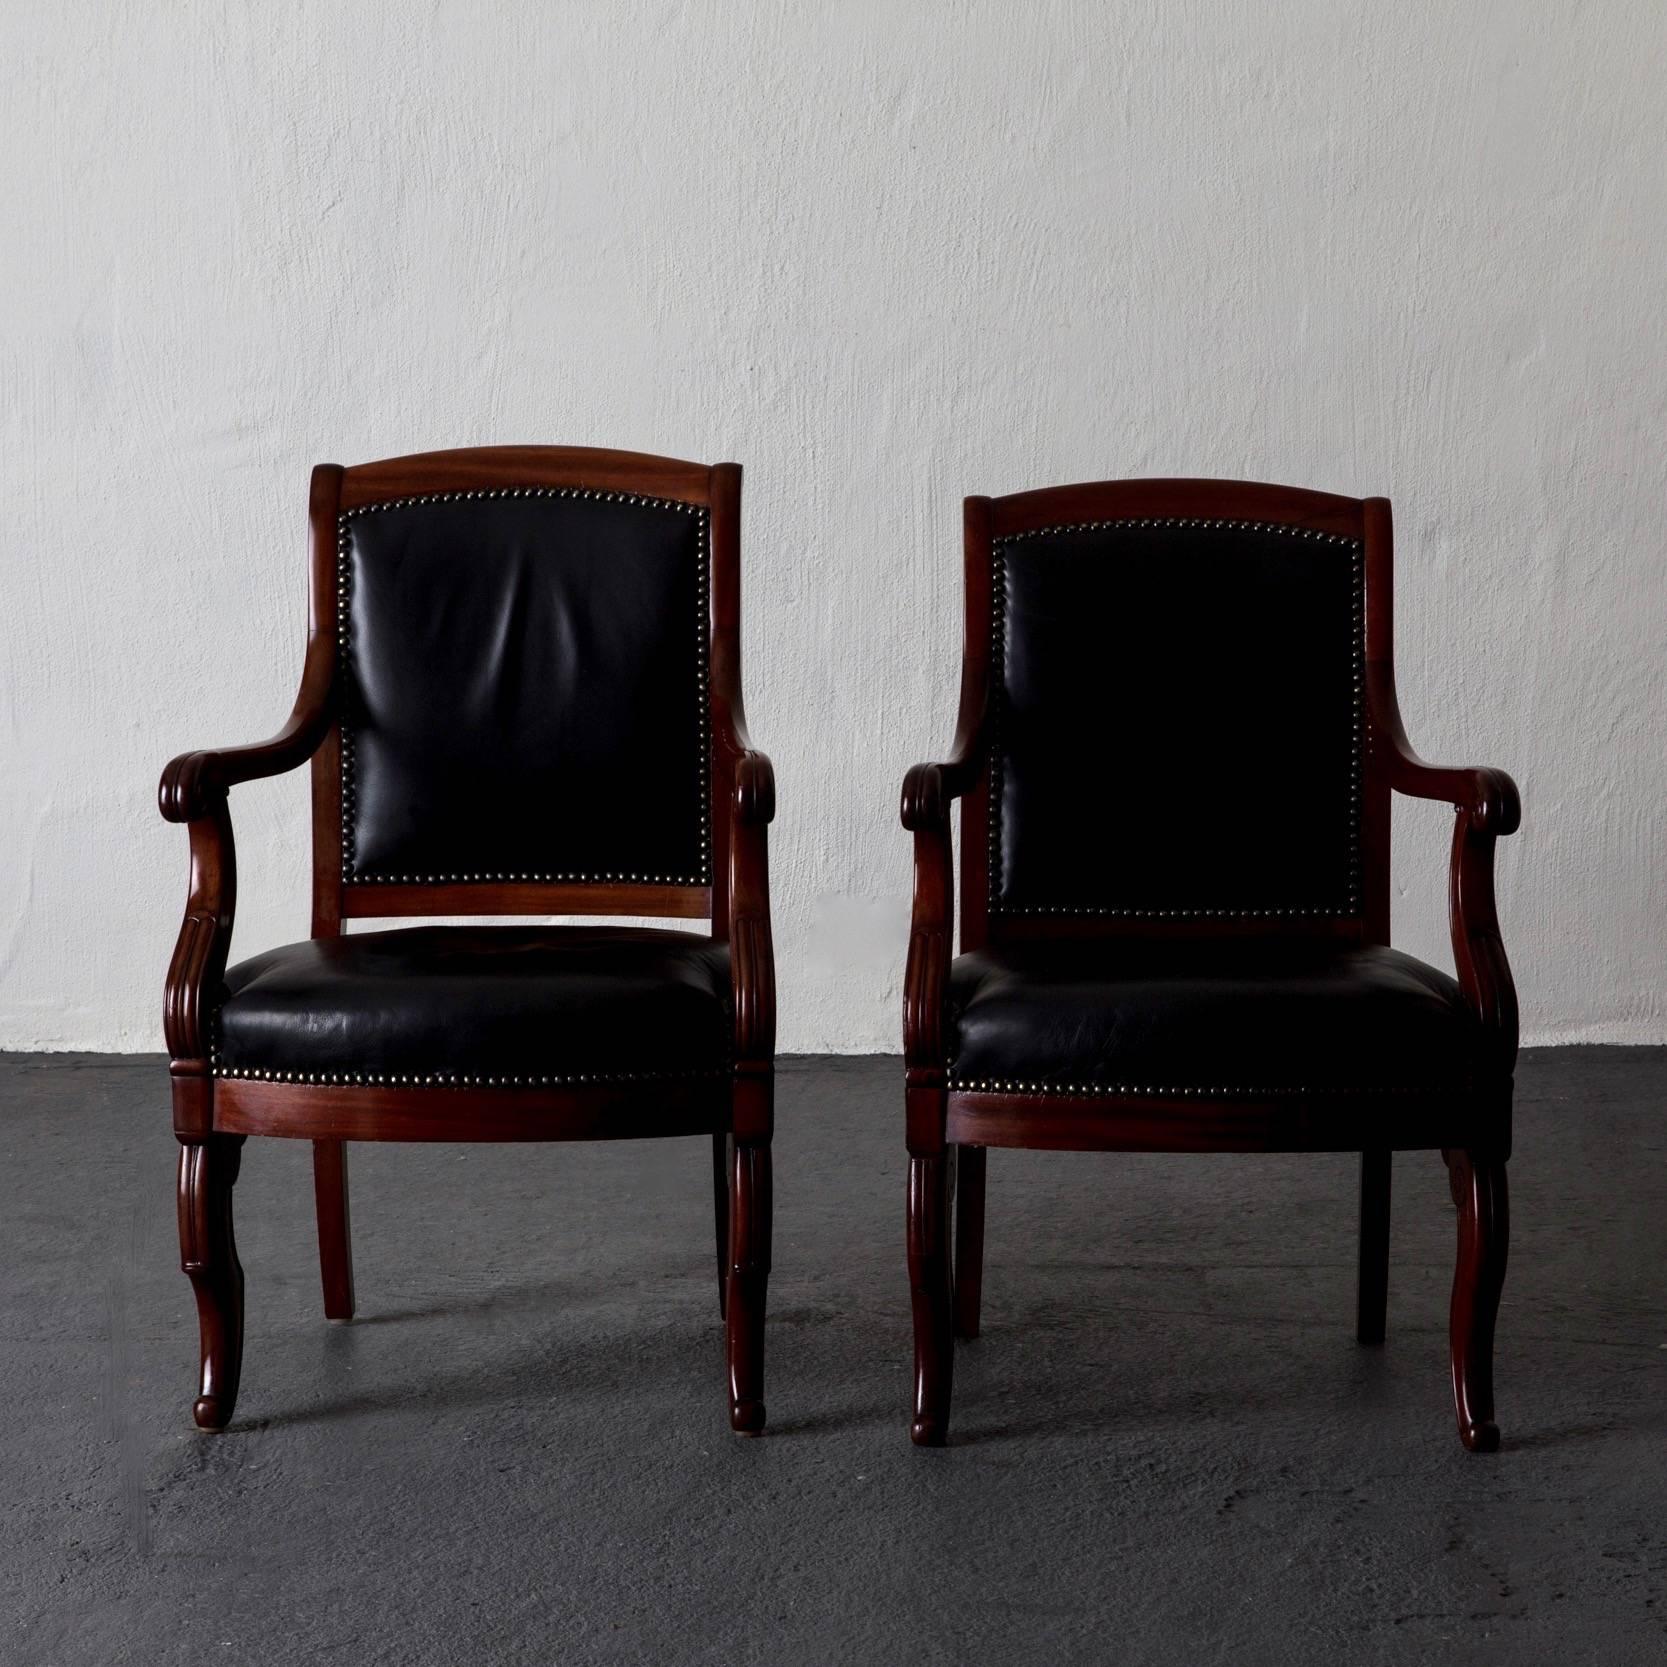 An assembled pair of French Empire armchairs made in mahogany and upholstered in a soft black leather decorated with nailheads. The chairs both comfortable and stylish.